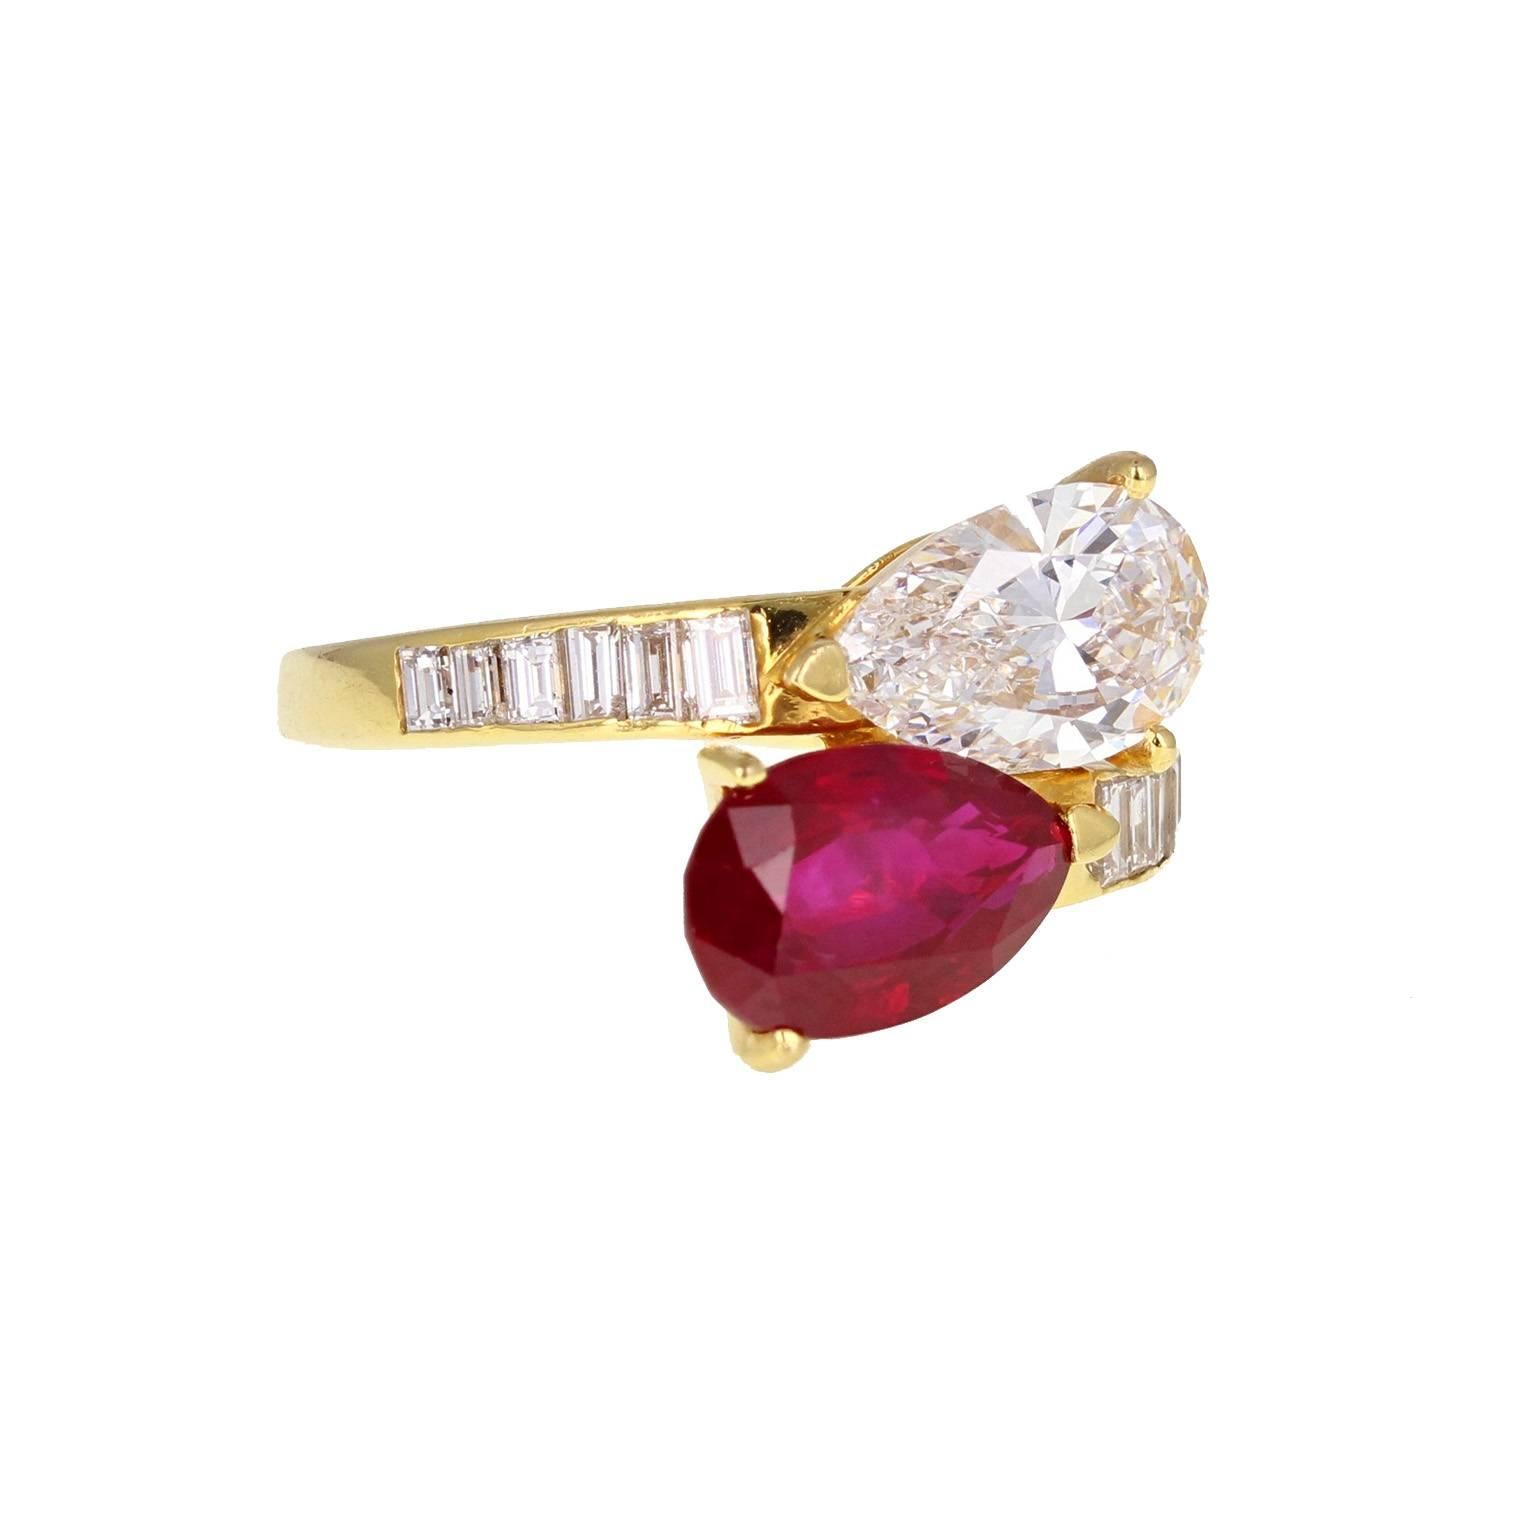 A fine and impressive 'toi et moi' ring, or 'you and me'. A perfectly matched pear-shaped ruby and pear-shaped diamond are mounted on a cross-over in 18 carat gold. Channel-set baguette-cut diamonds adorn the shoulders, leading to a tapering shank.